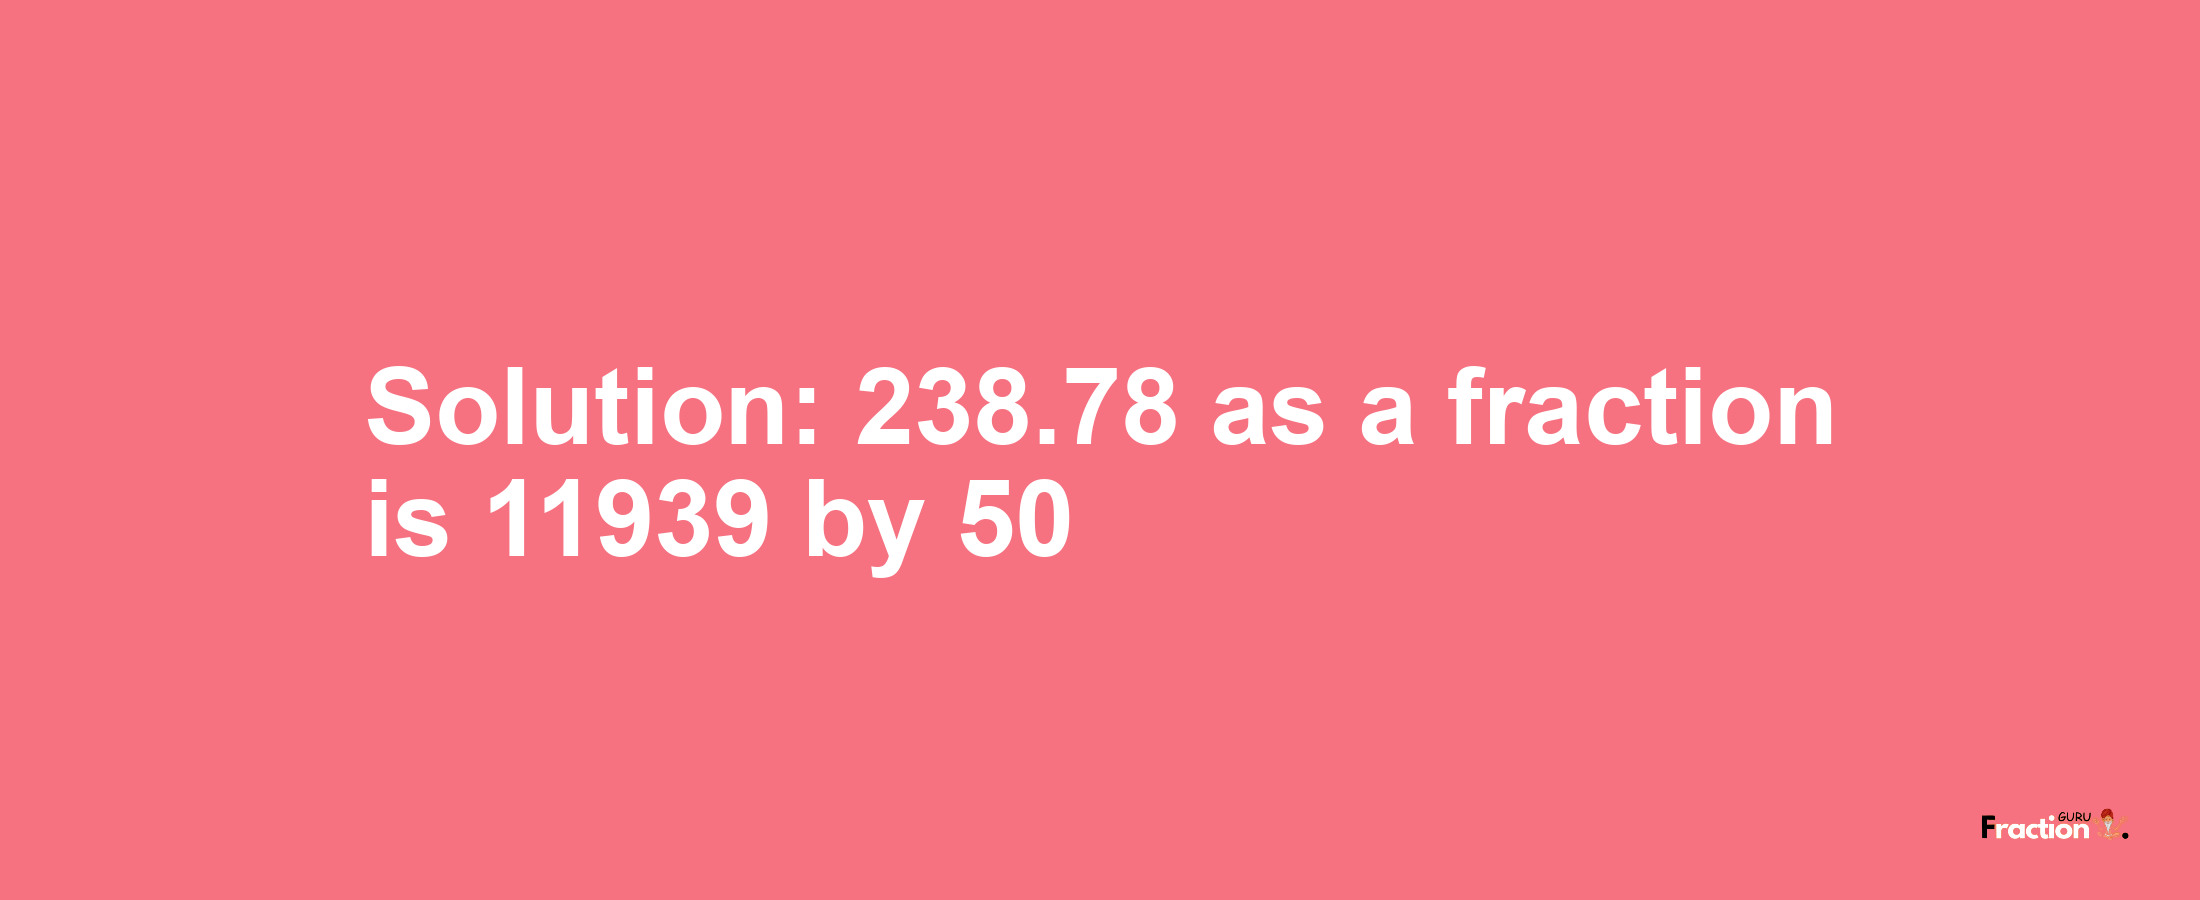 Solution:238.78 as a fraction is 11939/50